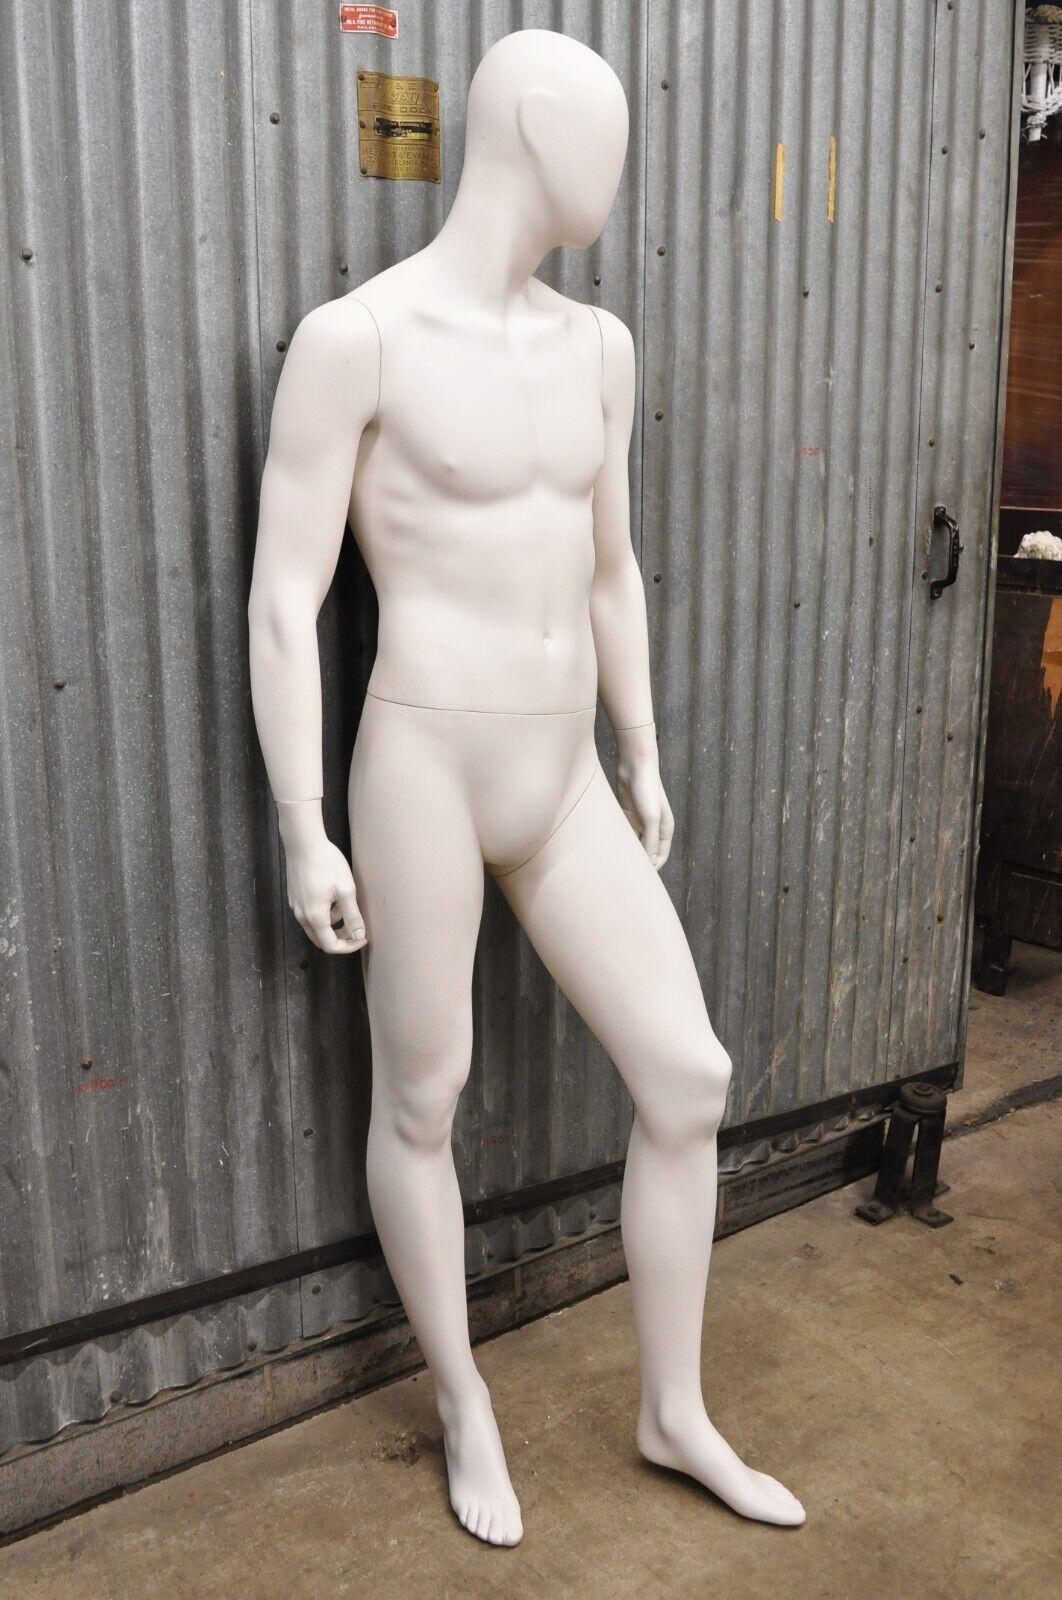 Male Fiberglass White Matte Finish Full Body Display Mannequin by Almax (A). Item features an egg head, 5 piece assembly, original box, not free standing, does not include base. Does not free stand. Circa 20th to 21st Century. Measurements: 74